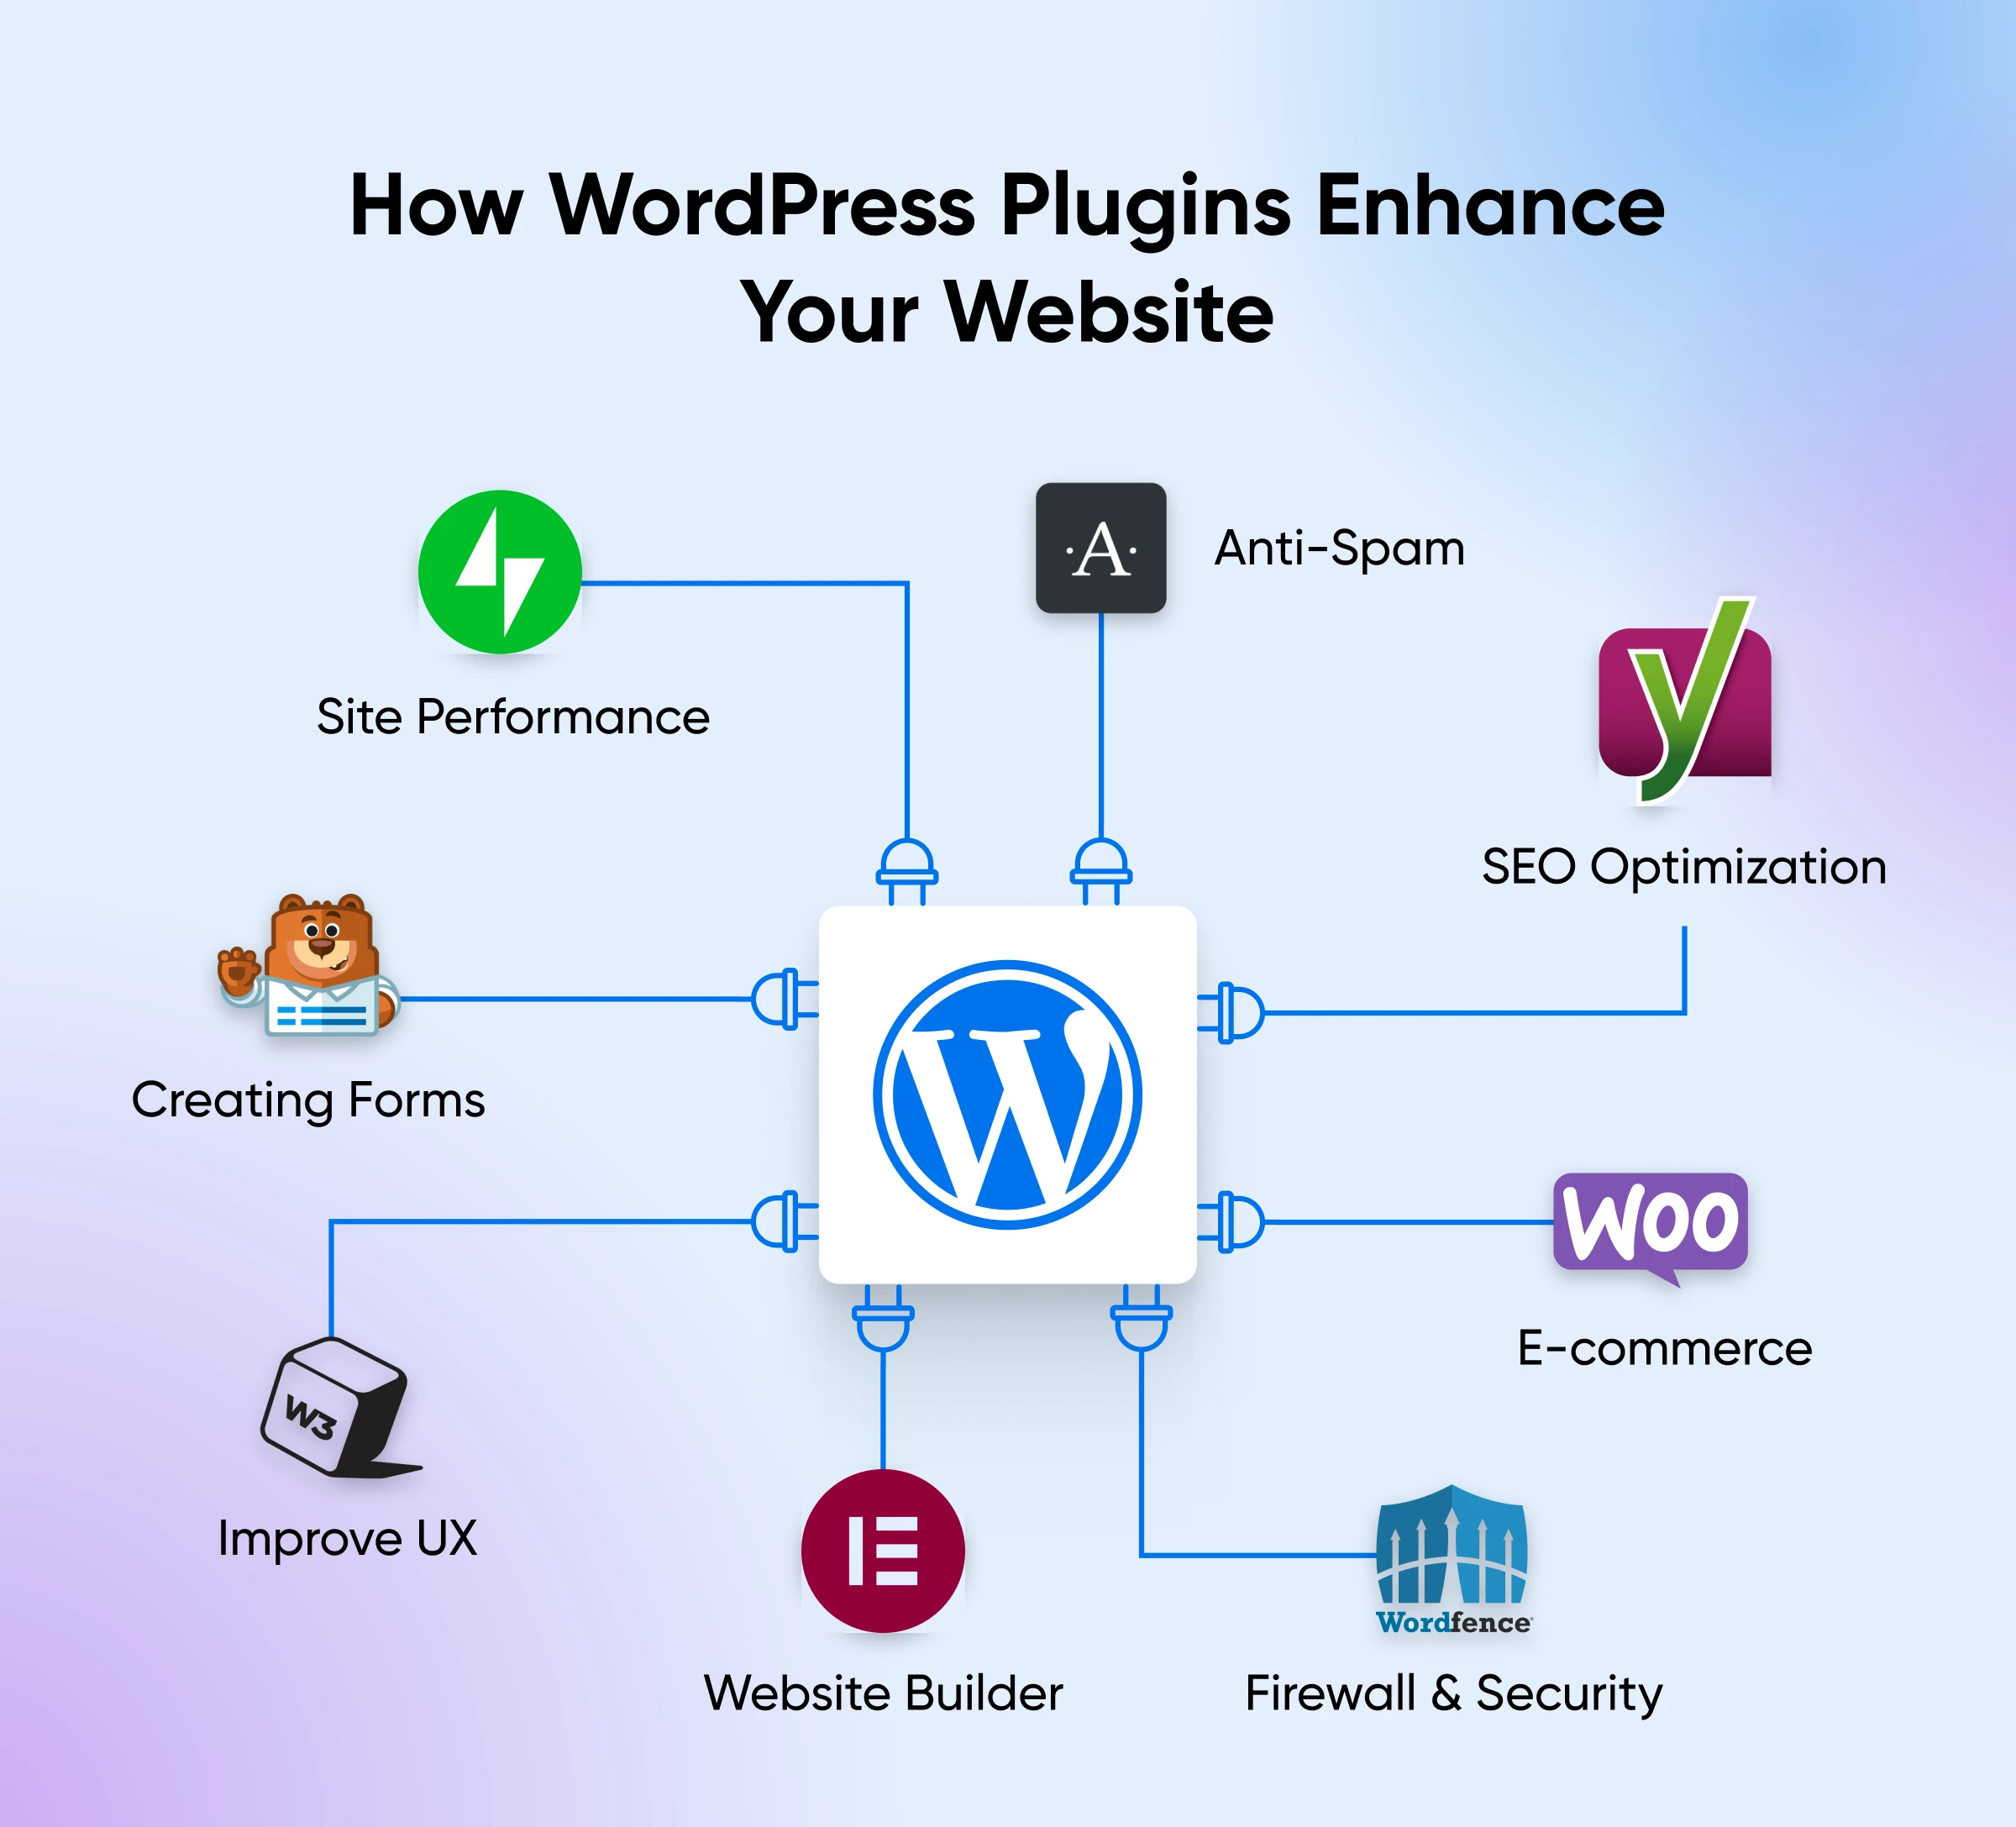 Mind map of "How WordPress Plugins Enhance Your Website" including icons and text for anti-spam, improve UX etc.